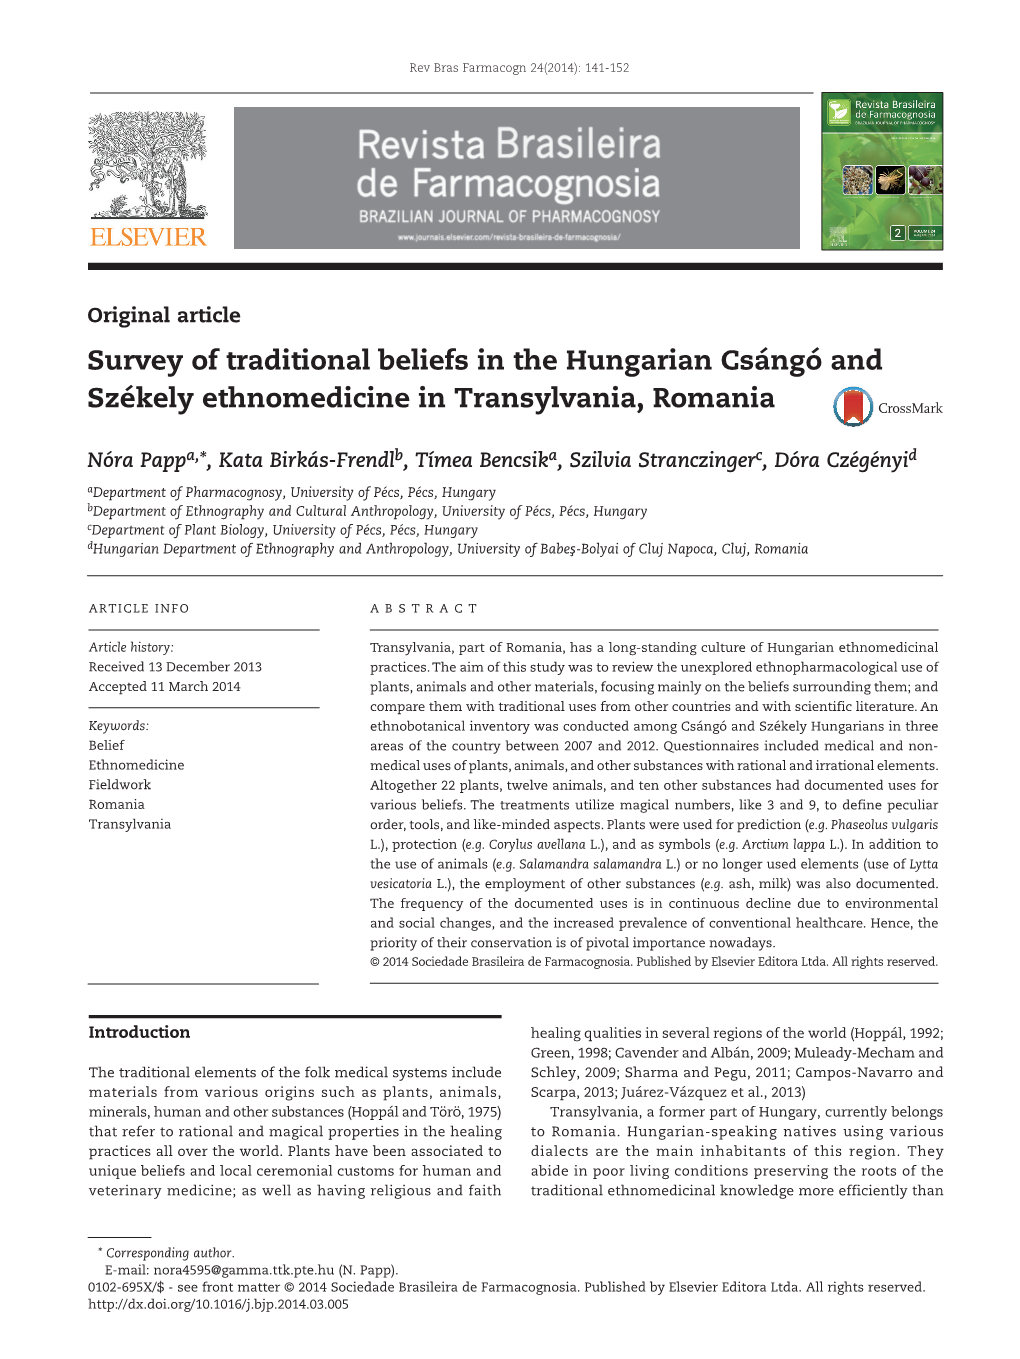 Survey of Traditional Beliefs in the Hungarian Csángó and Székely Ethnomedicine in Transylvania, Romania